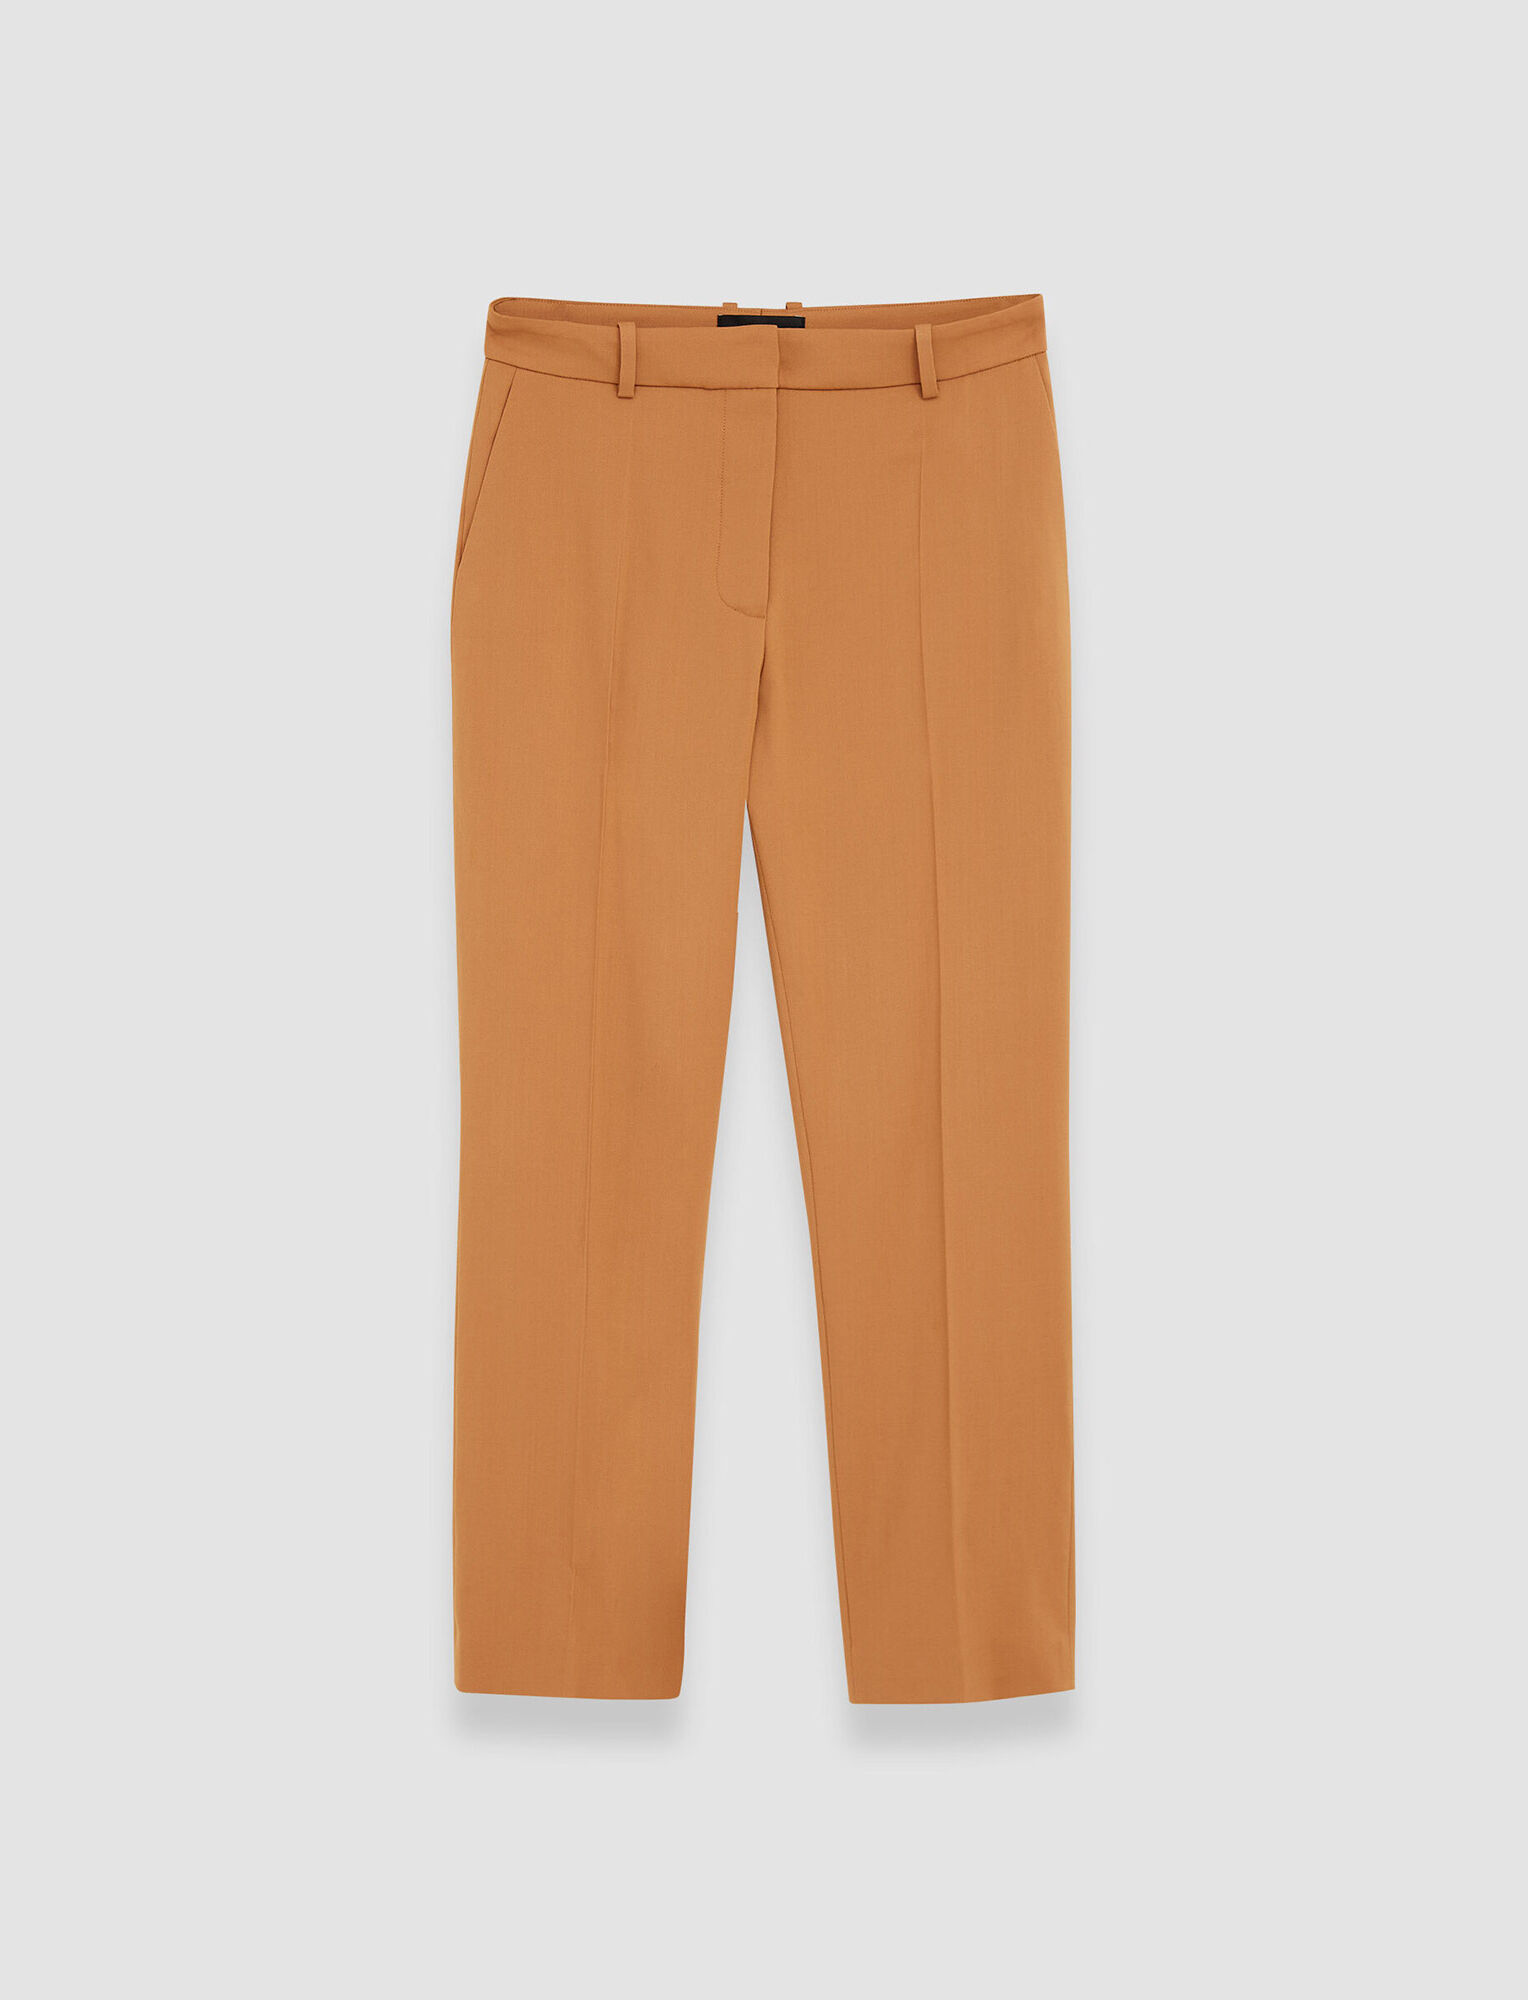 Joseph, Tailoring Wool Stretch Coleman Trousers, in Clay